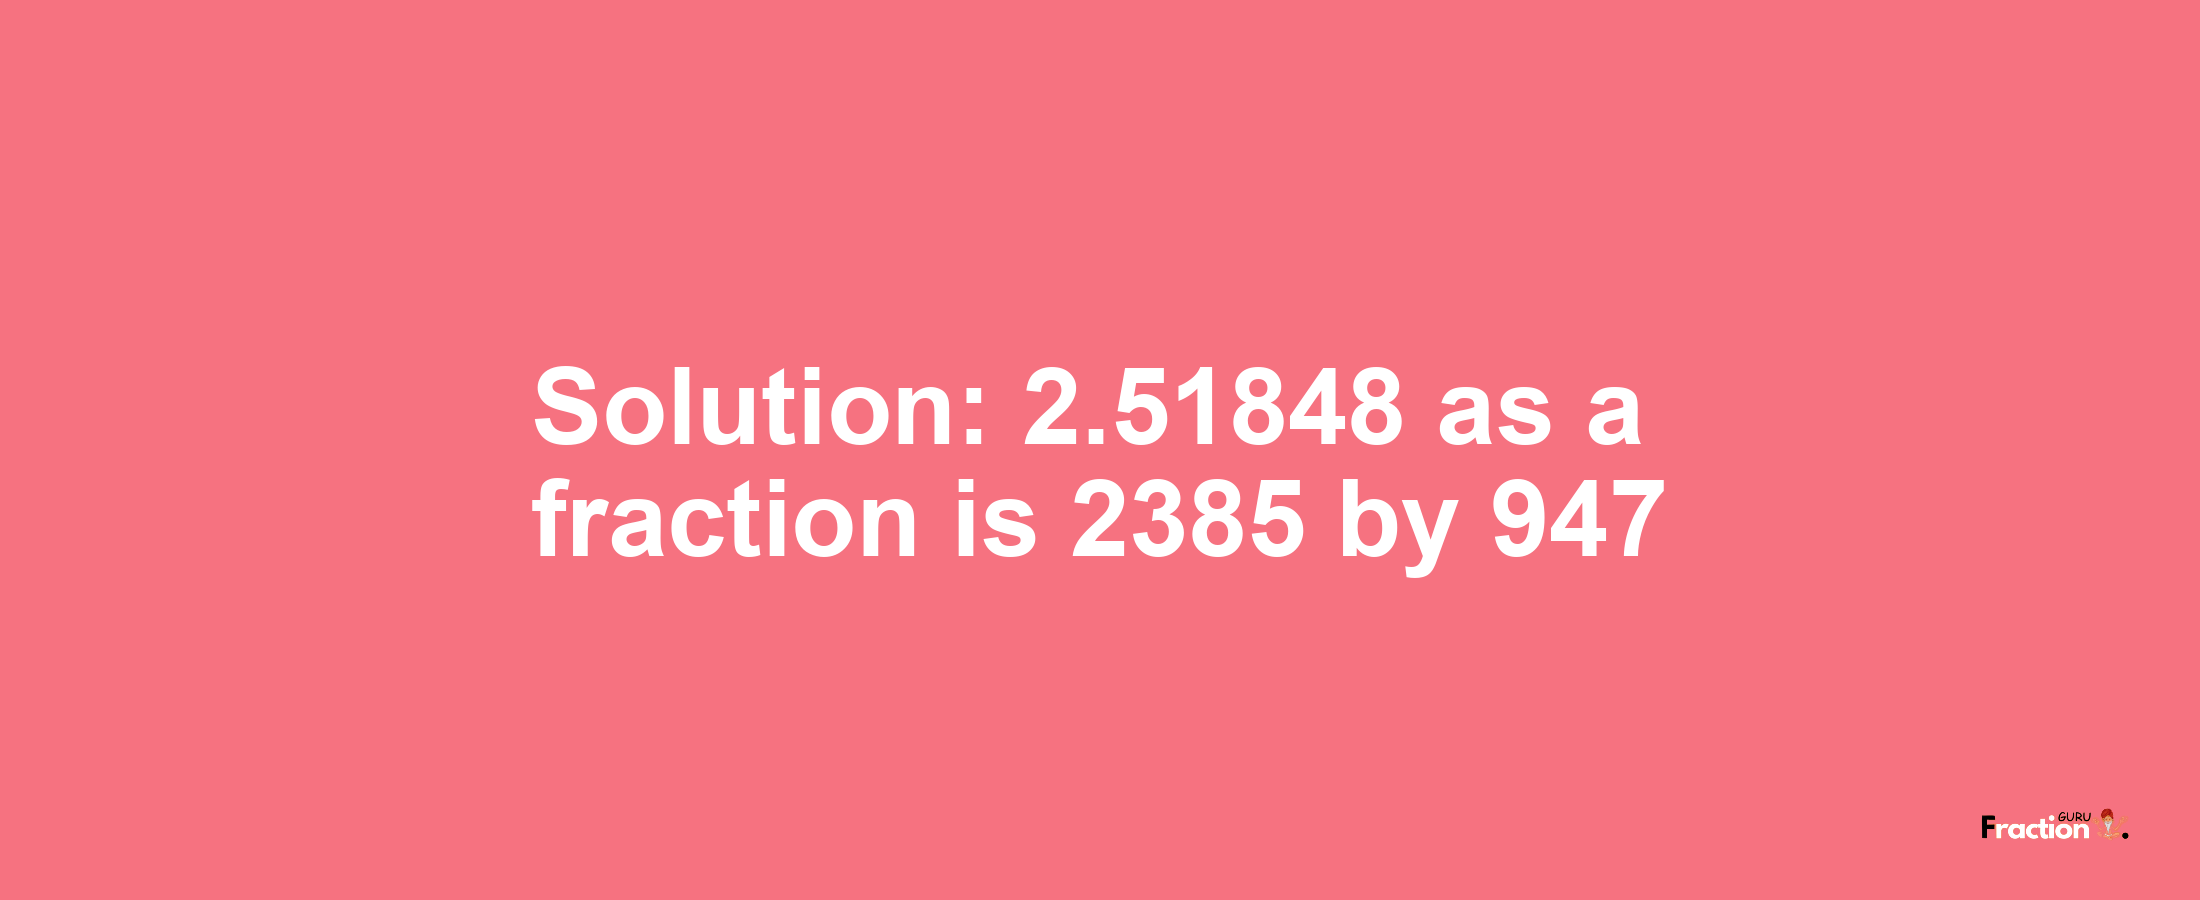 Solution:2.51848 as a fraction is 2385/947